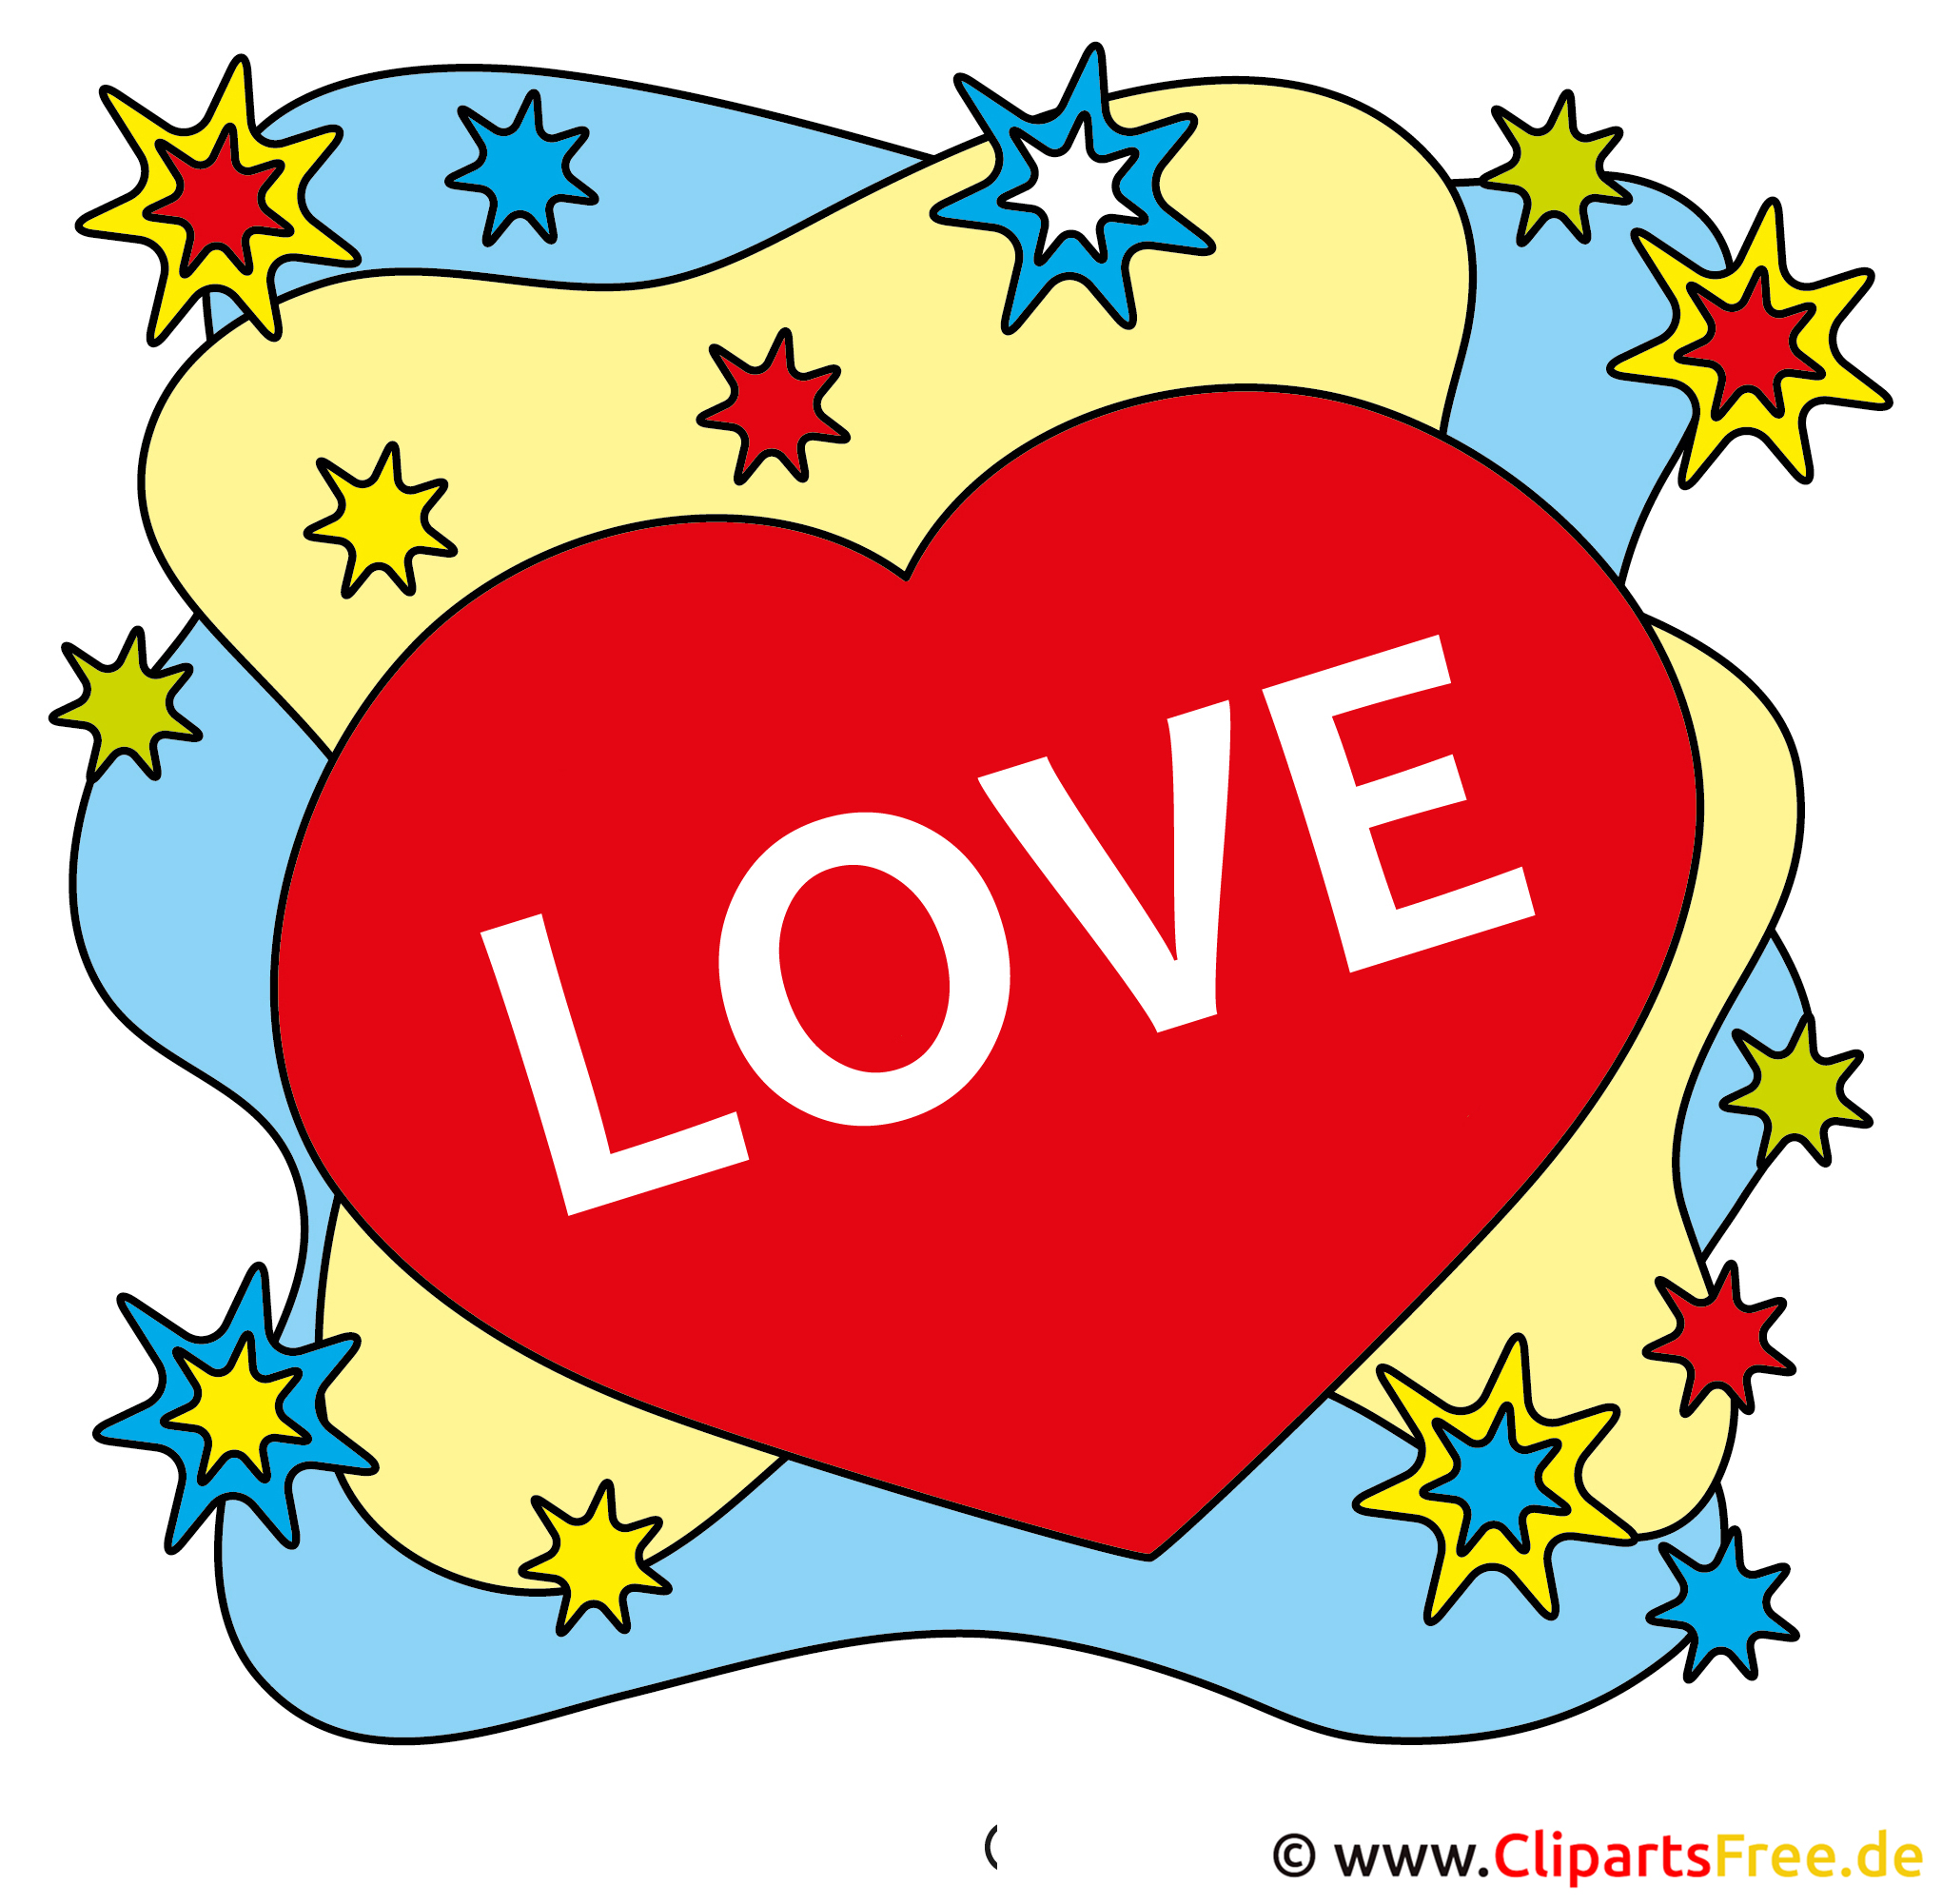 Love Clip Art Free Clipart Images 2 Wikiclipart - vrogue.co